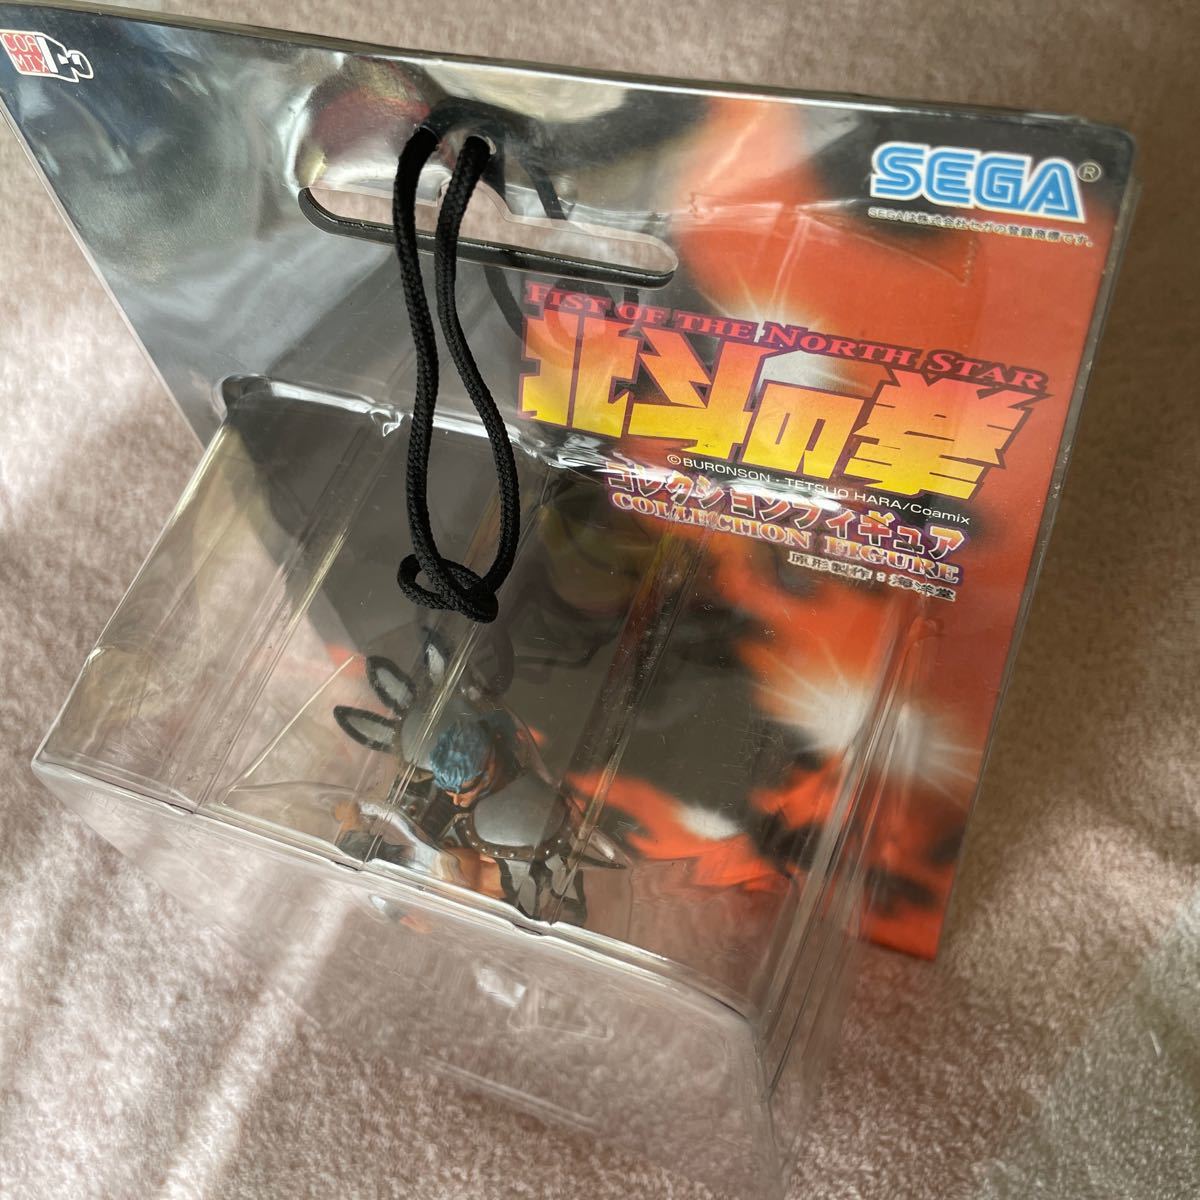 SEGA Ken, the Great Bear Fist collection figure south .. car star compilation - manner -hyu-i. shape made Kaiyodo 2003MADE IN CHINA unused unopened that time thing beautiful goods 